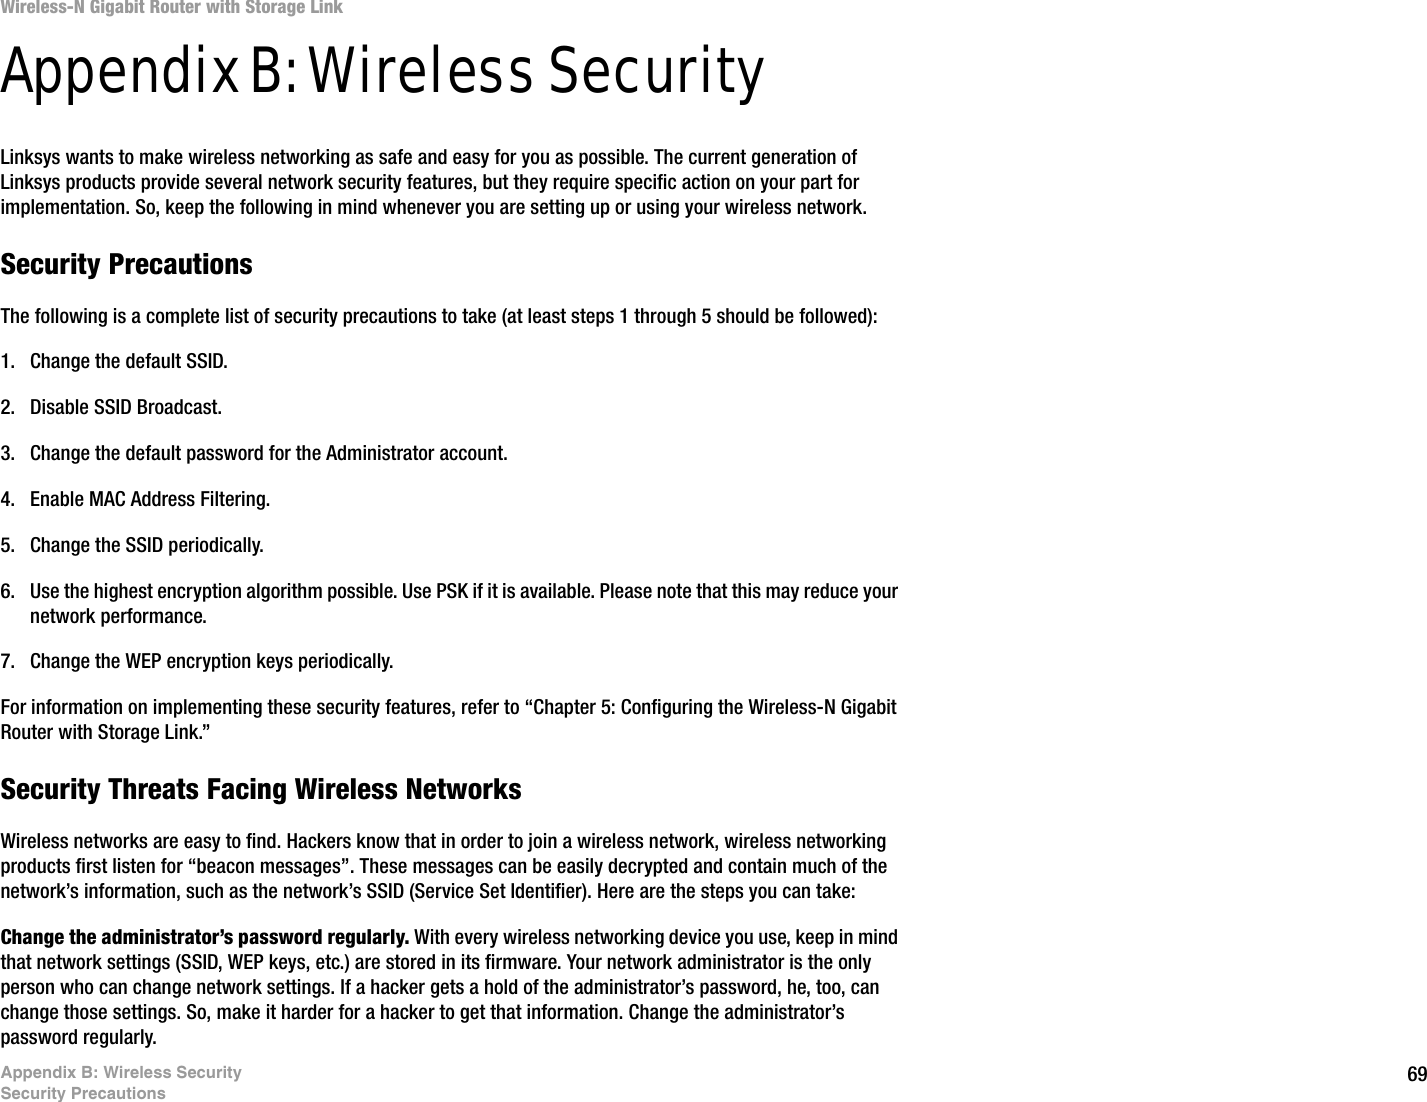 69Appendix B: Wireless SecuritySecurity PrecautionsWireless-N Gigabit Router with Storage LinkAppendix B: Wireless SecurityLinksys wants to make wireless networking as safe and easy for you as possible. The current generation of Linksys products provide several network security features, but they require specific action on your part for implementation. So, keep the following in mind whenever you are setting up or using your wireless network.Security PrecautionsThe following is a complete list of security precautions to take (at least steps 1 through 5 should be followed):1. Change the default SSID. 2. Disable SSID Broadcast. 3. Change the default password for the Administrator account. 4. Enable MAC Address Filtering. 5. Change the SSID periodically. 6. Use the highest encryption algorithm possible. Use PSK if it is available. Please note that this may reduce your network performance. 7. Change the WEP encryption keys periodically. For information on implementing these security features, refer to “Chapter 5: Configuring the Wireless-N Gigabit Router with Storage Link.”Security Threats Facing Wireless Networks Wireless networks are easy to find. Hackers know that in order to join a wireless network, wireless networking products first listen for “beacon messages”. These messages can be easily decrypted and contain much of the network’s information, such as the network’s SSID (Service Set Identifier). Here are the steps you can take:Change the administrator’s password regularly. With every wireless networking device you use, keep in mind that network settings (SSID, WEP keys, etc.) are stored in its firmware. Your network administrator is the only person who can change network settings. If a hacker gets a hold of the administrator’s password, he, too, can change those settings. So, make it harder for a hacker to get that information. Change the administrator’s password regularly.